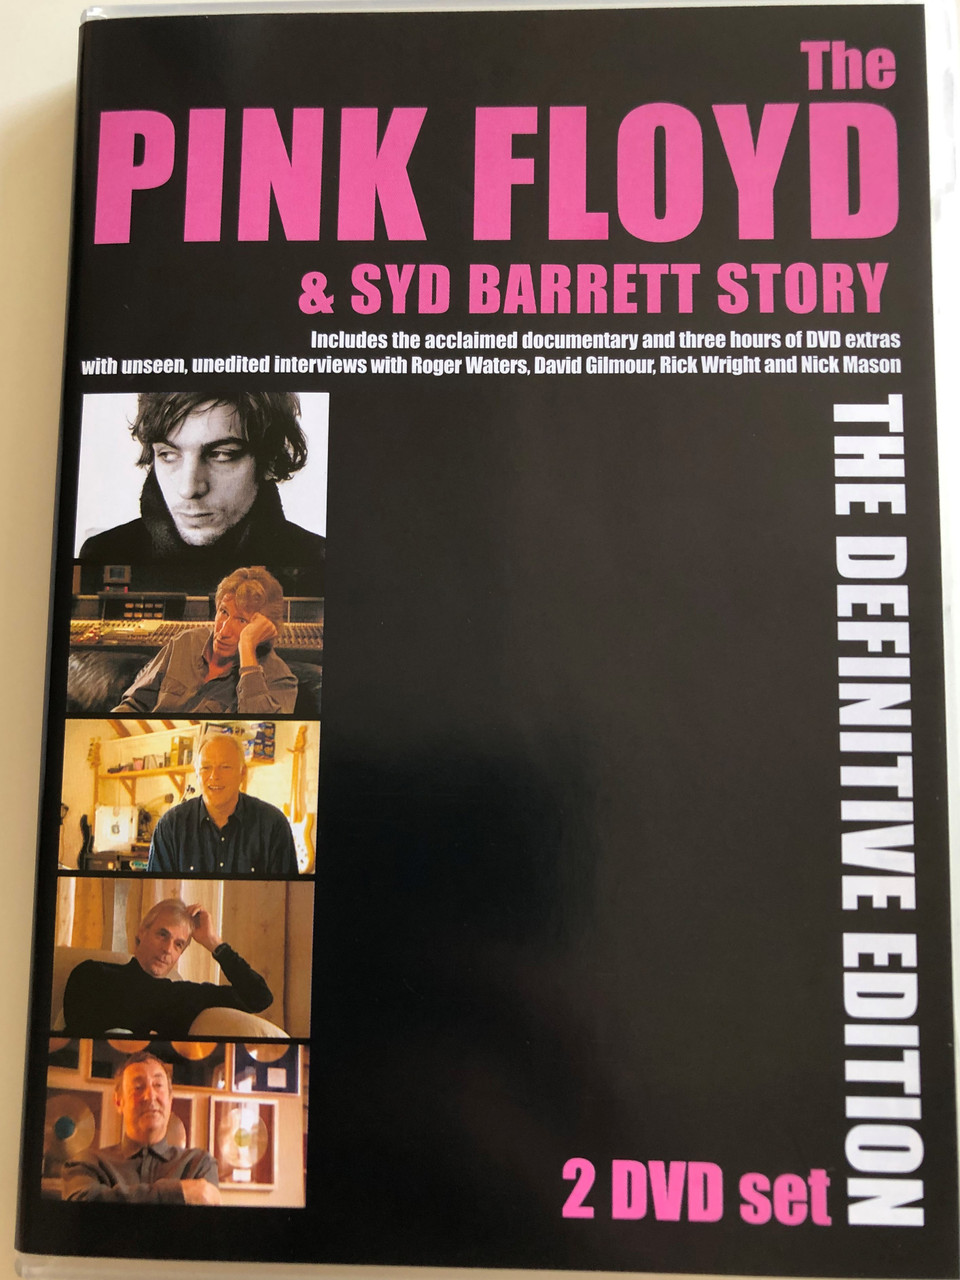 The Pink Floyd & Syd Barrett Story 2 DVD Set 2001 / The Definitive Edition  / Roger Waters interview, David Gilmour, Nick Mason / Directed by John  Edginton - bibleinmylanguage